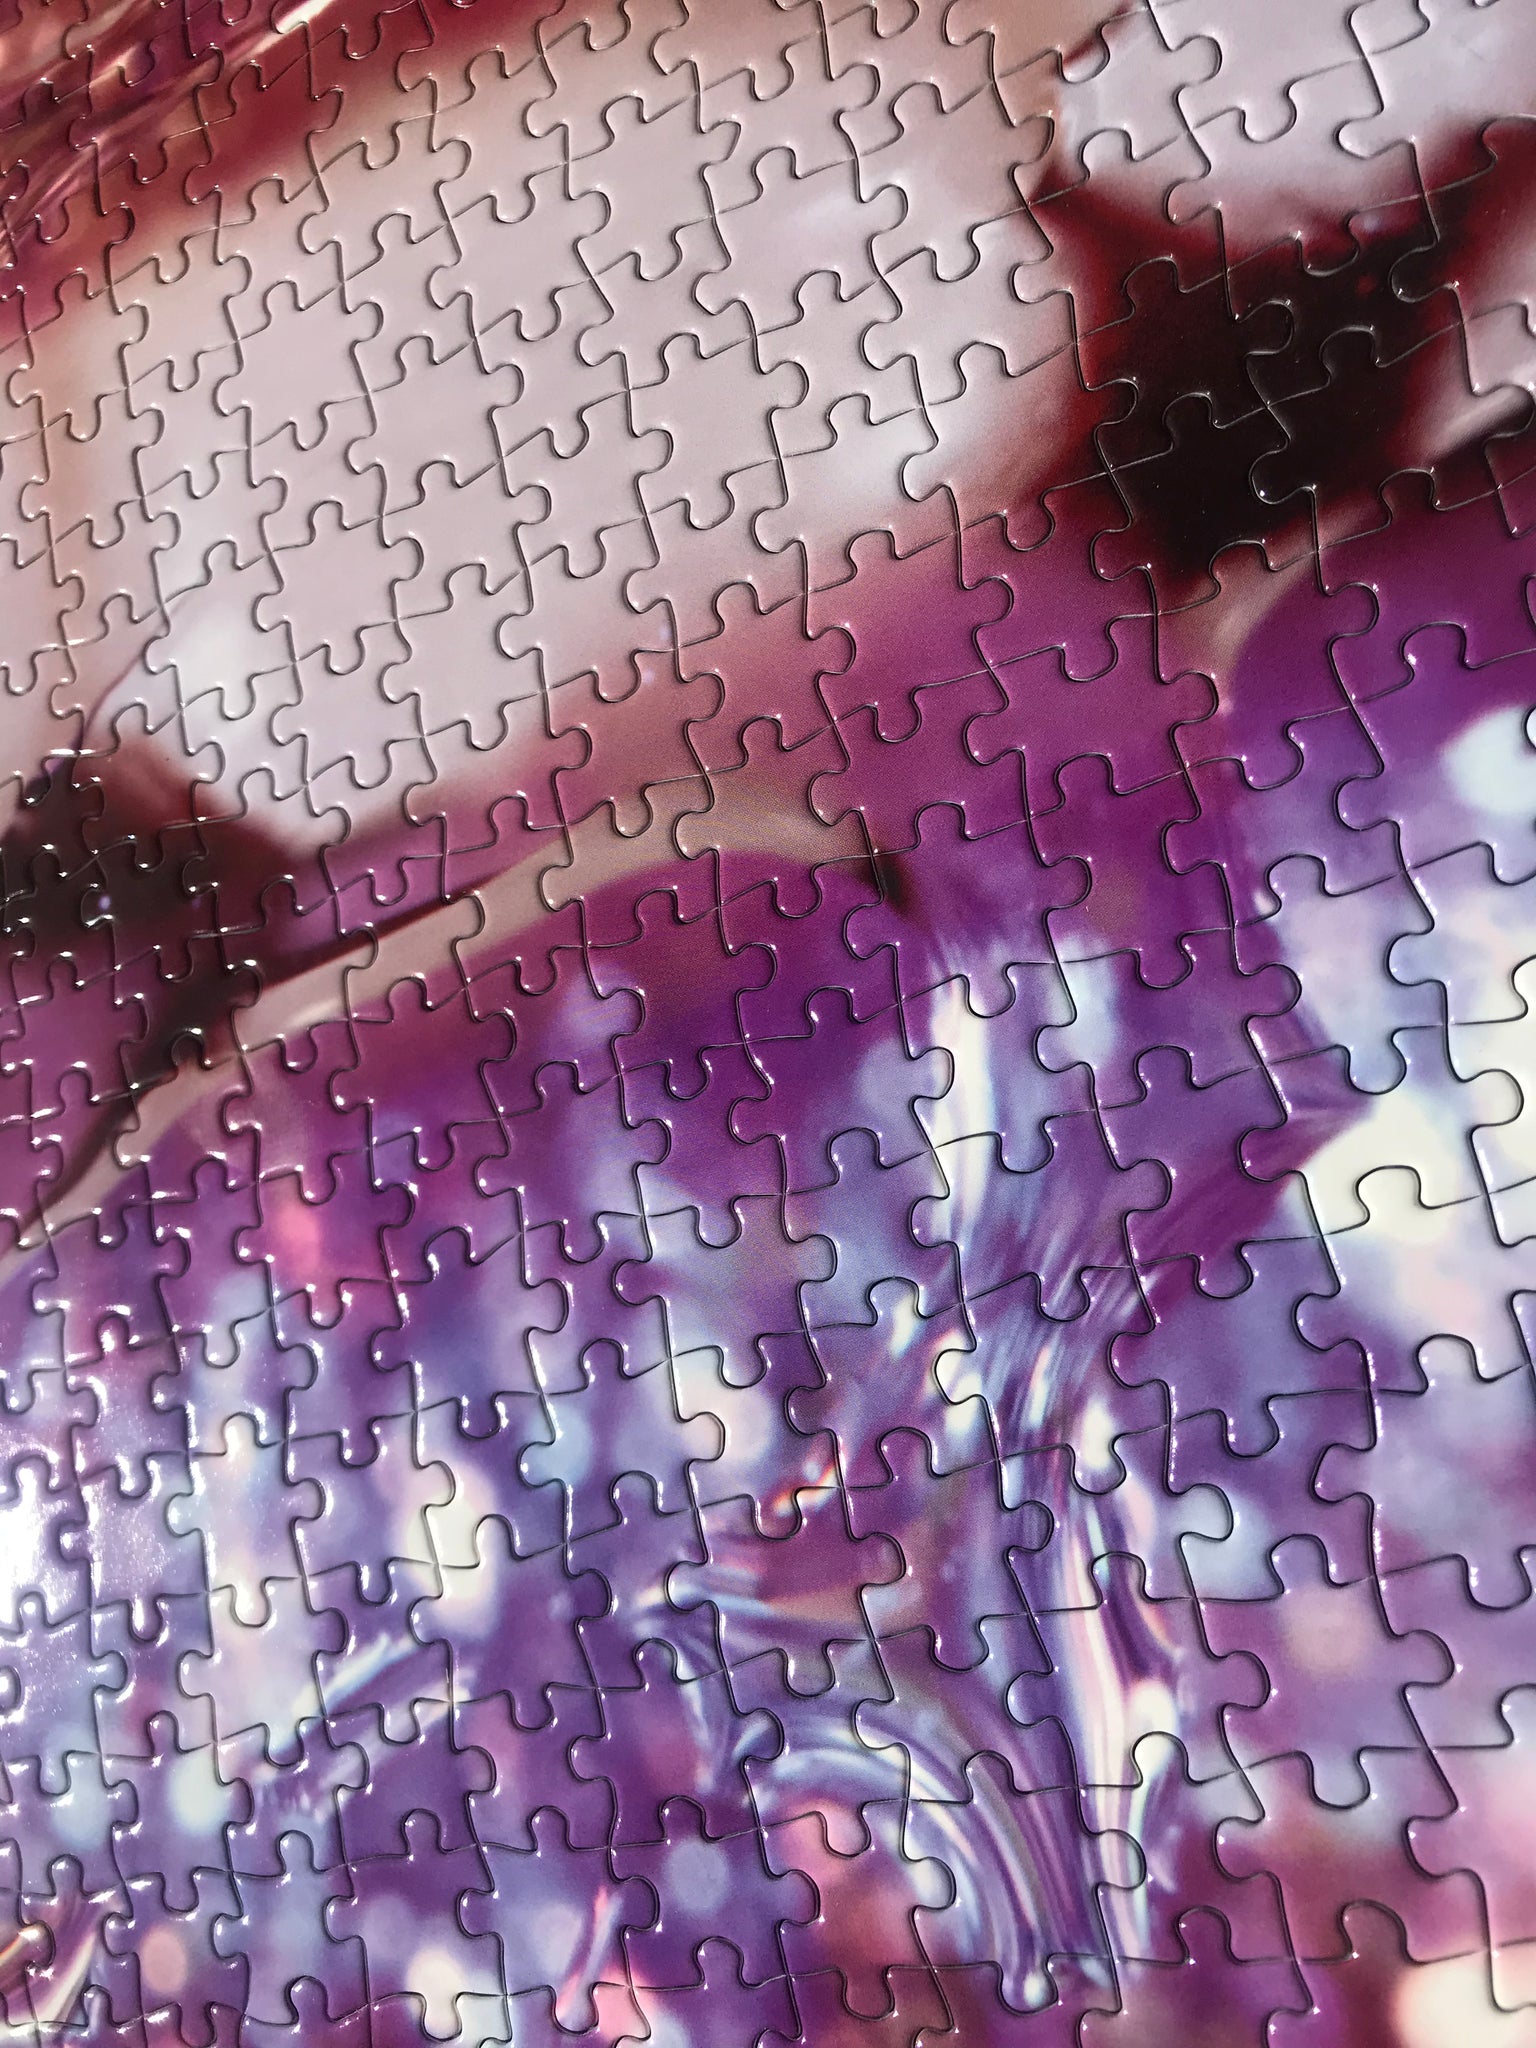 Artist Marilyn Minter: Unlimited Collector Edition Jigsaw Puzzle